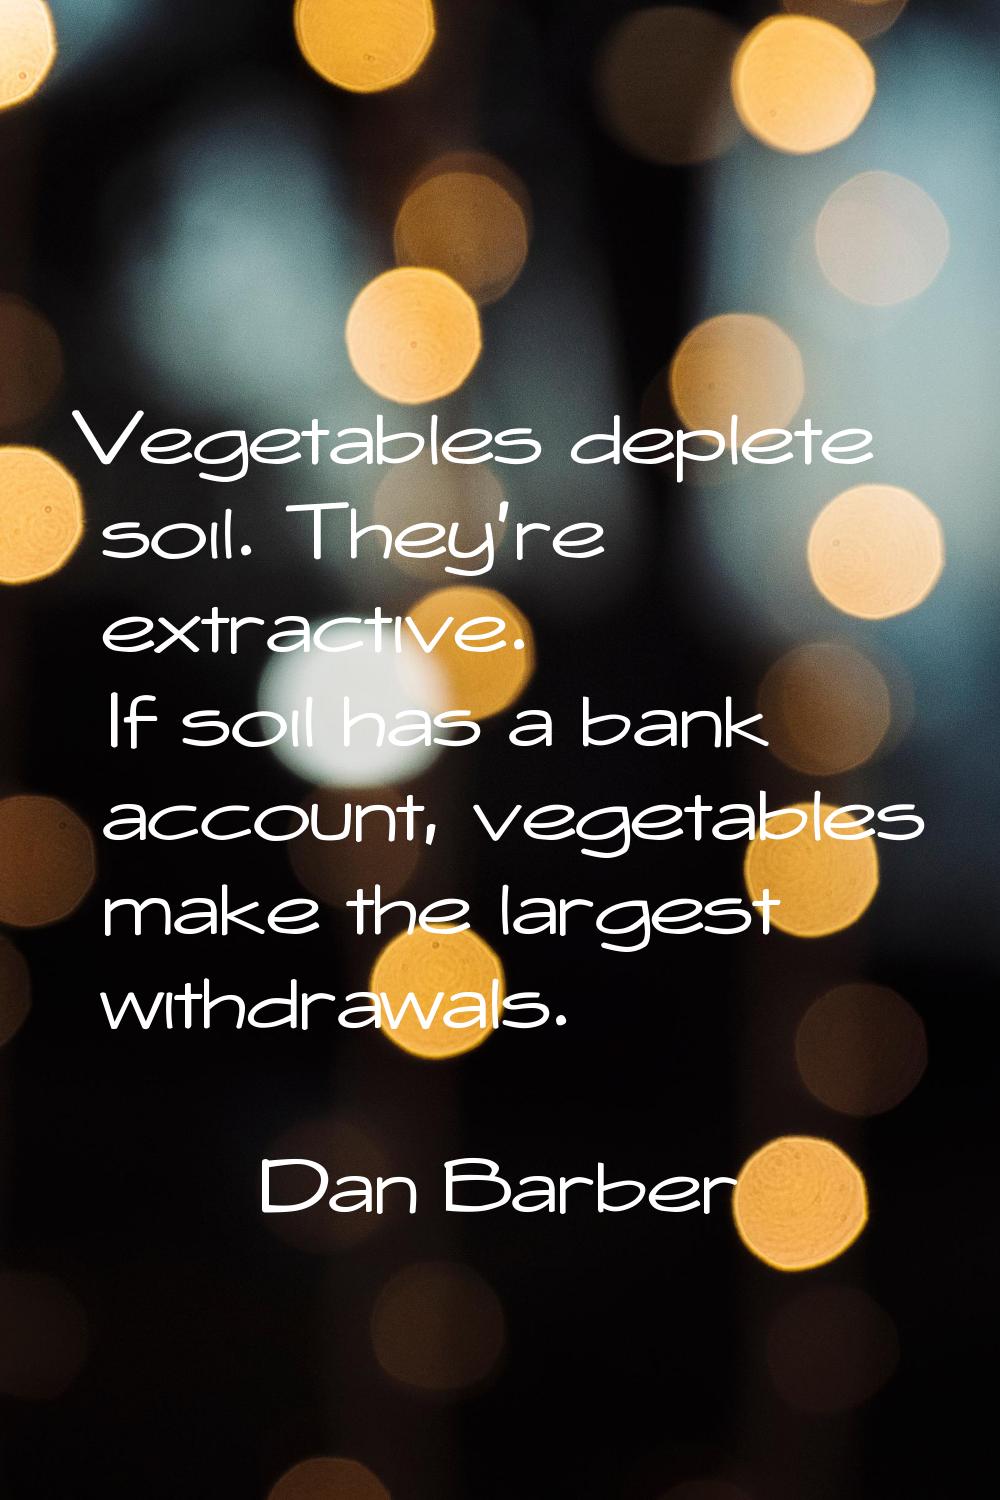 Vegetables deplete soil. They're extractive. If soil has a bank account, vegetables make the larges